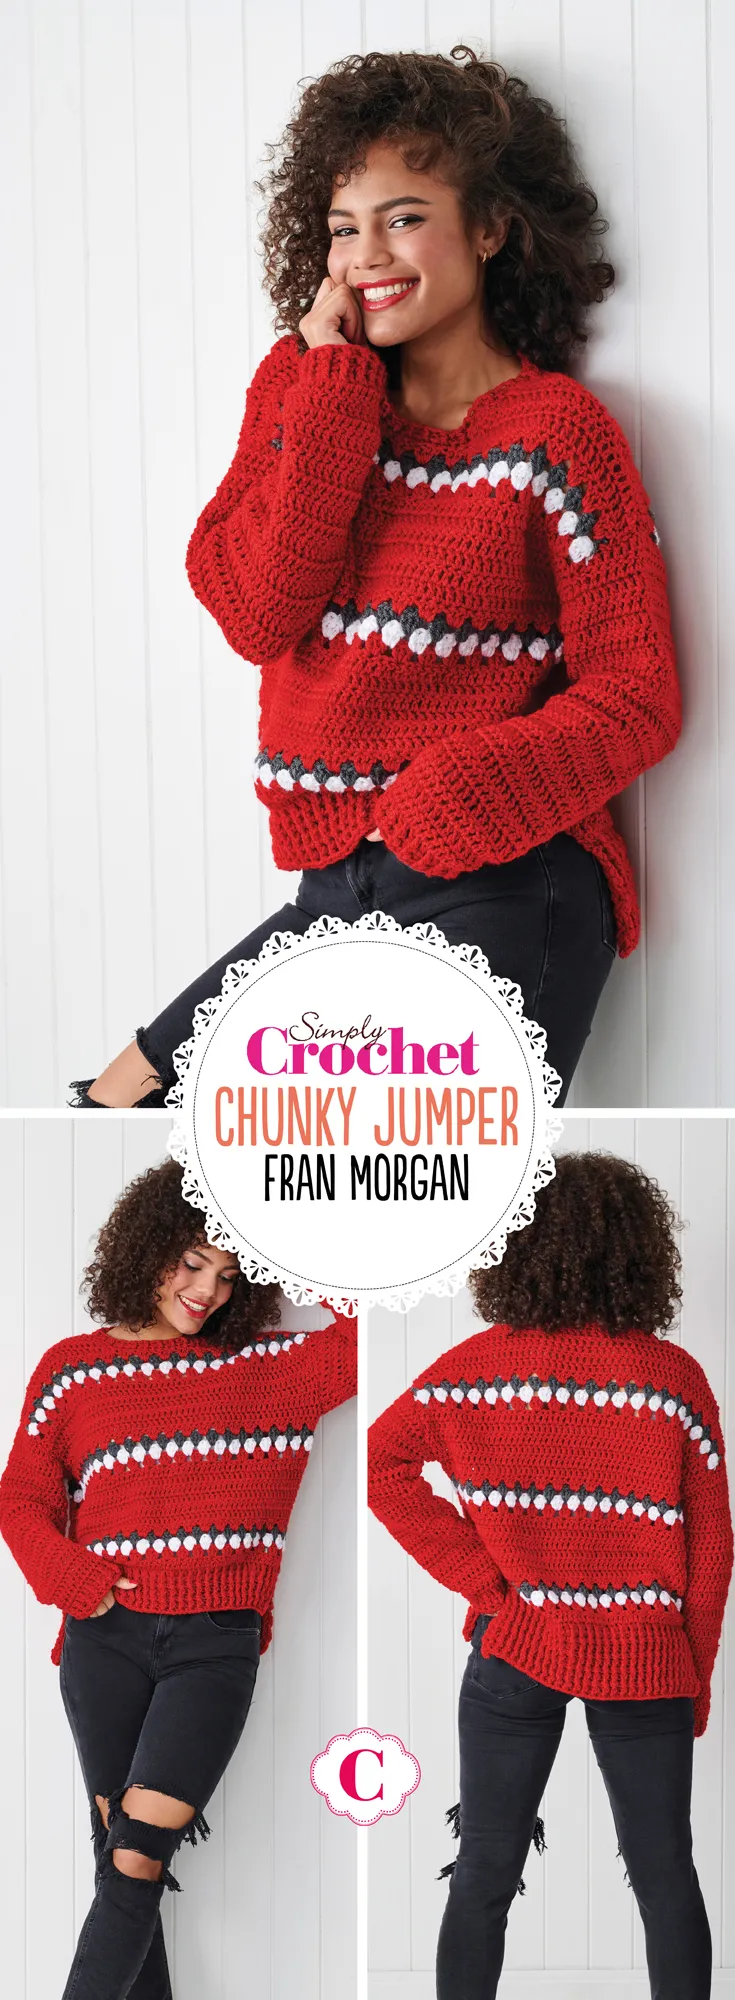 Simply_Crochet_issue90_Chunky_jumper_pin